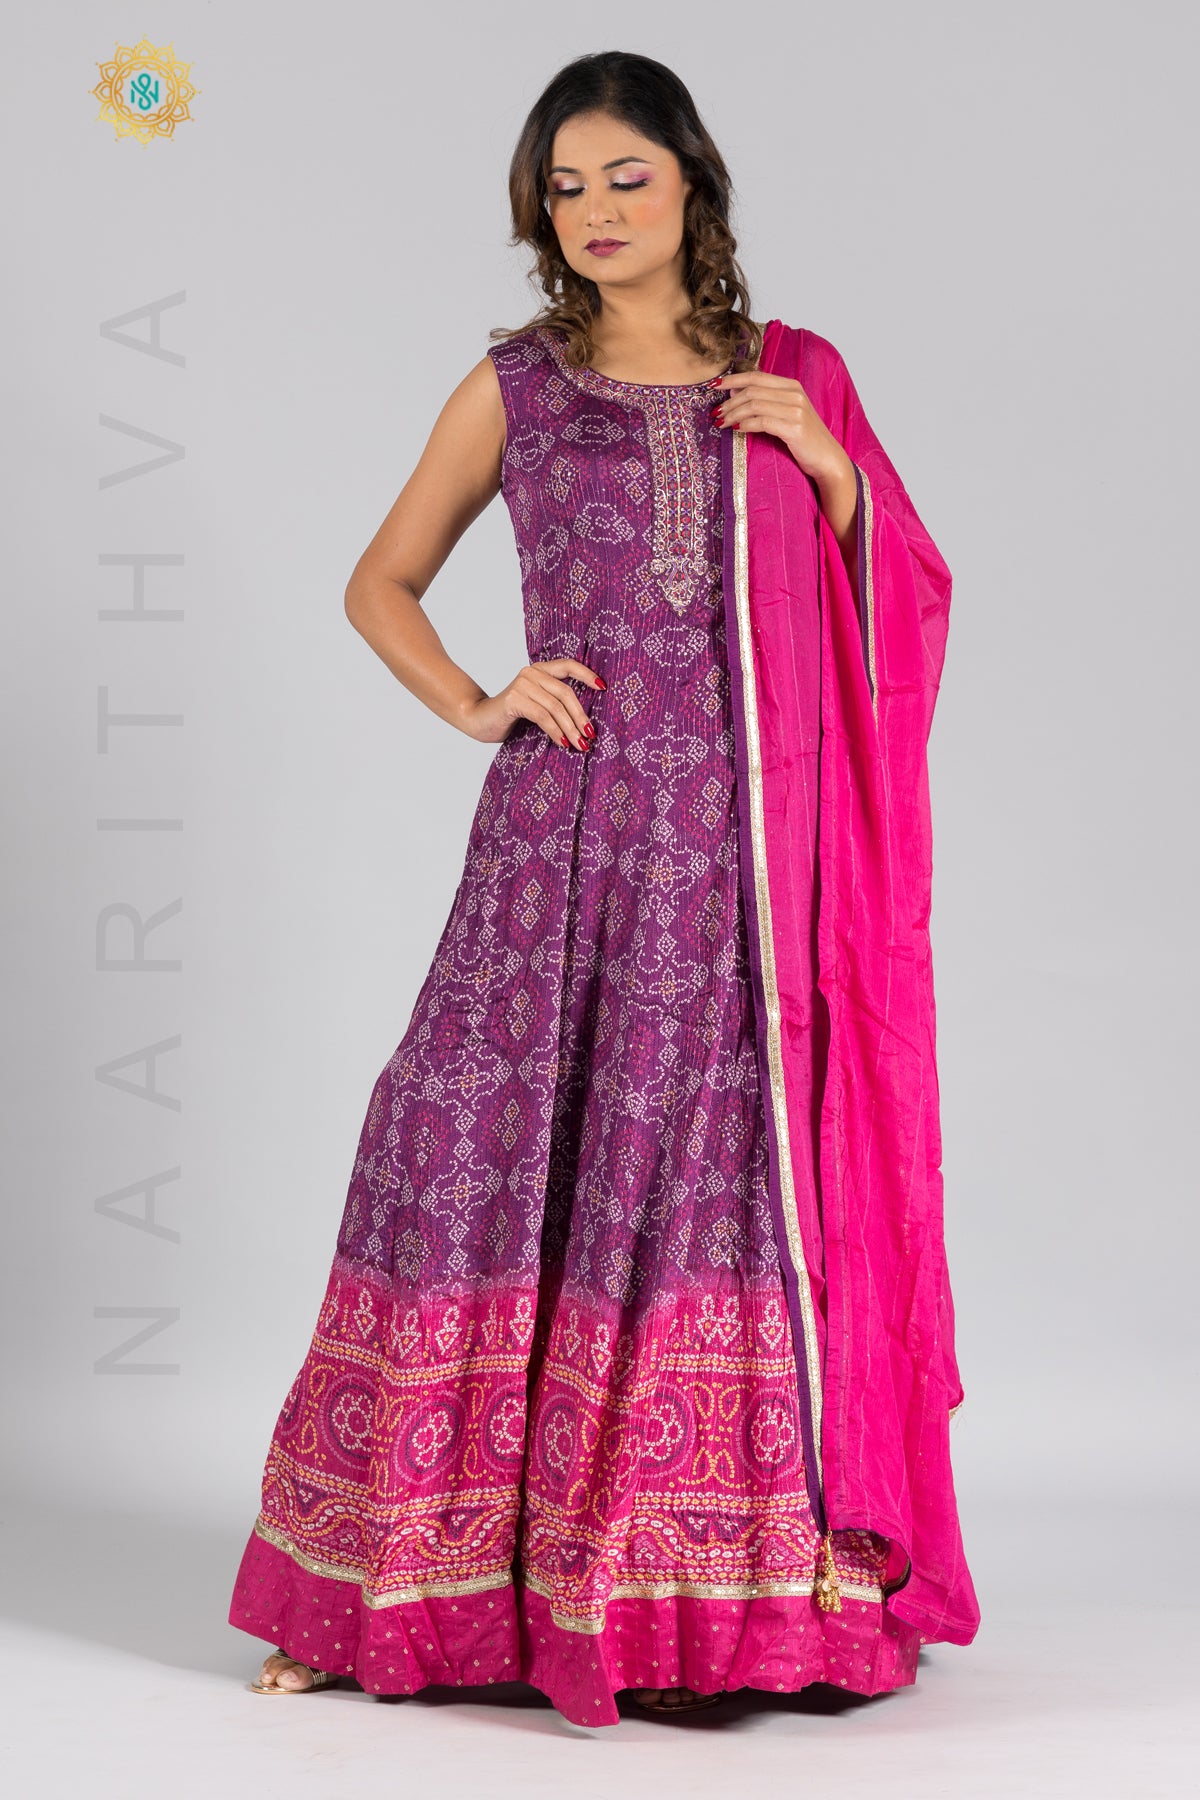 PURPLE WITH PINK - PARTY WEAR GOWN WITH NECK LINE HAND WORK & DUPATTA